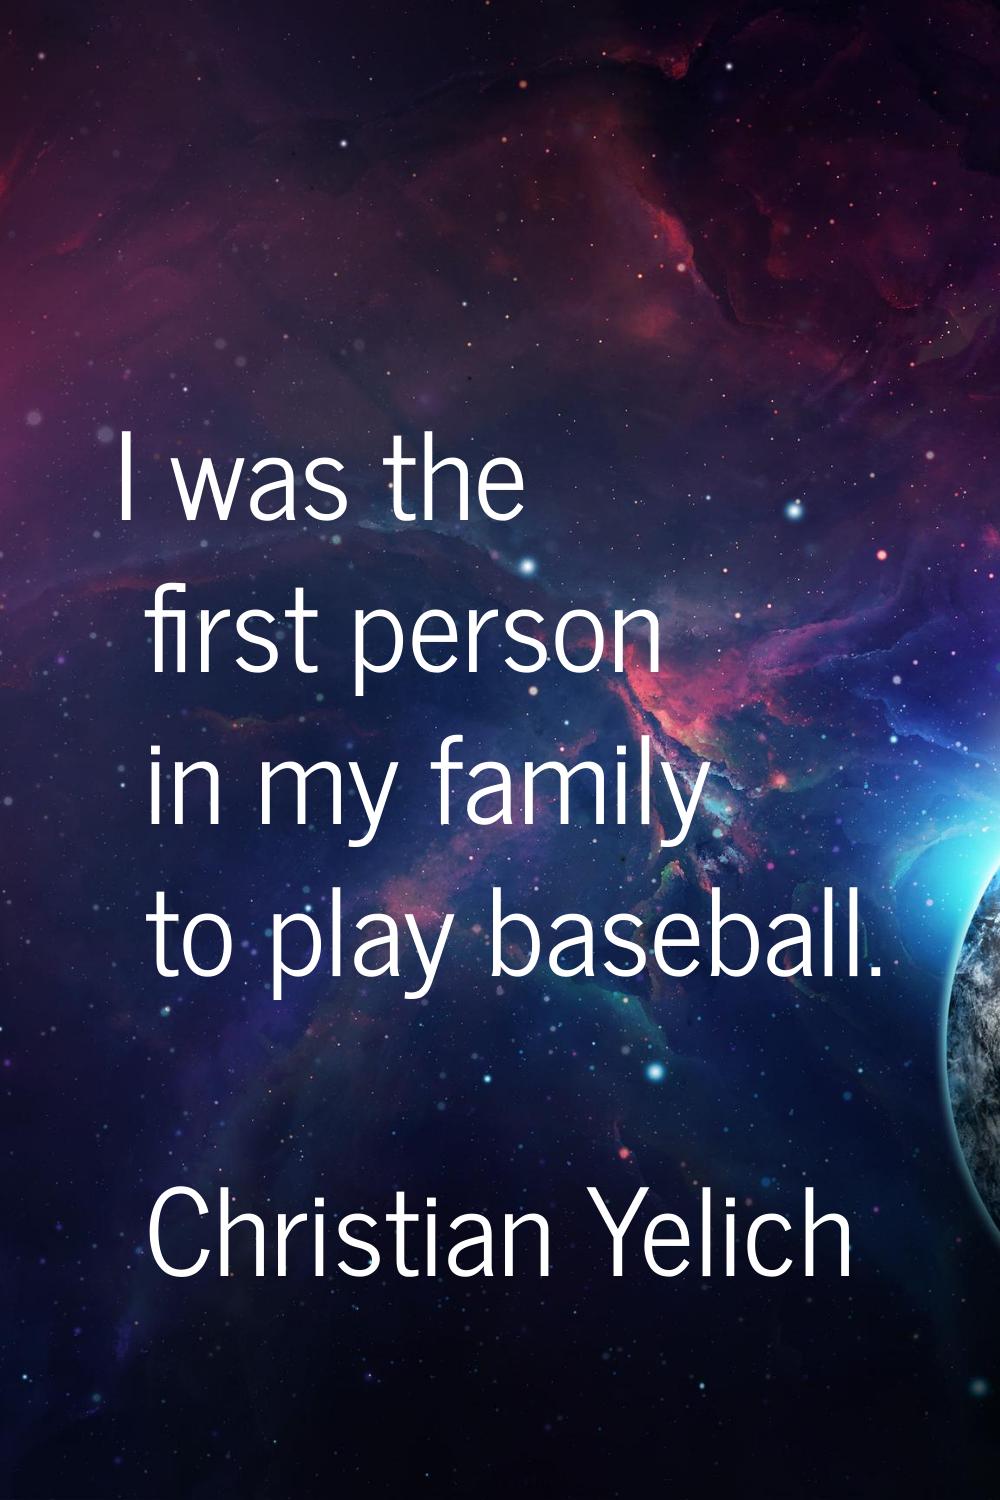 I was the first person in my family to play baseball.